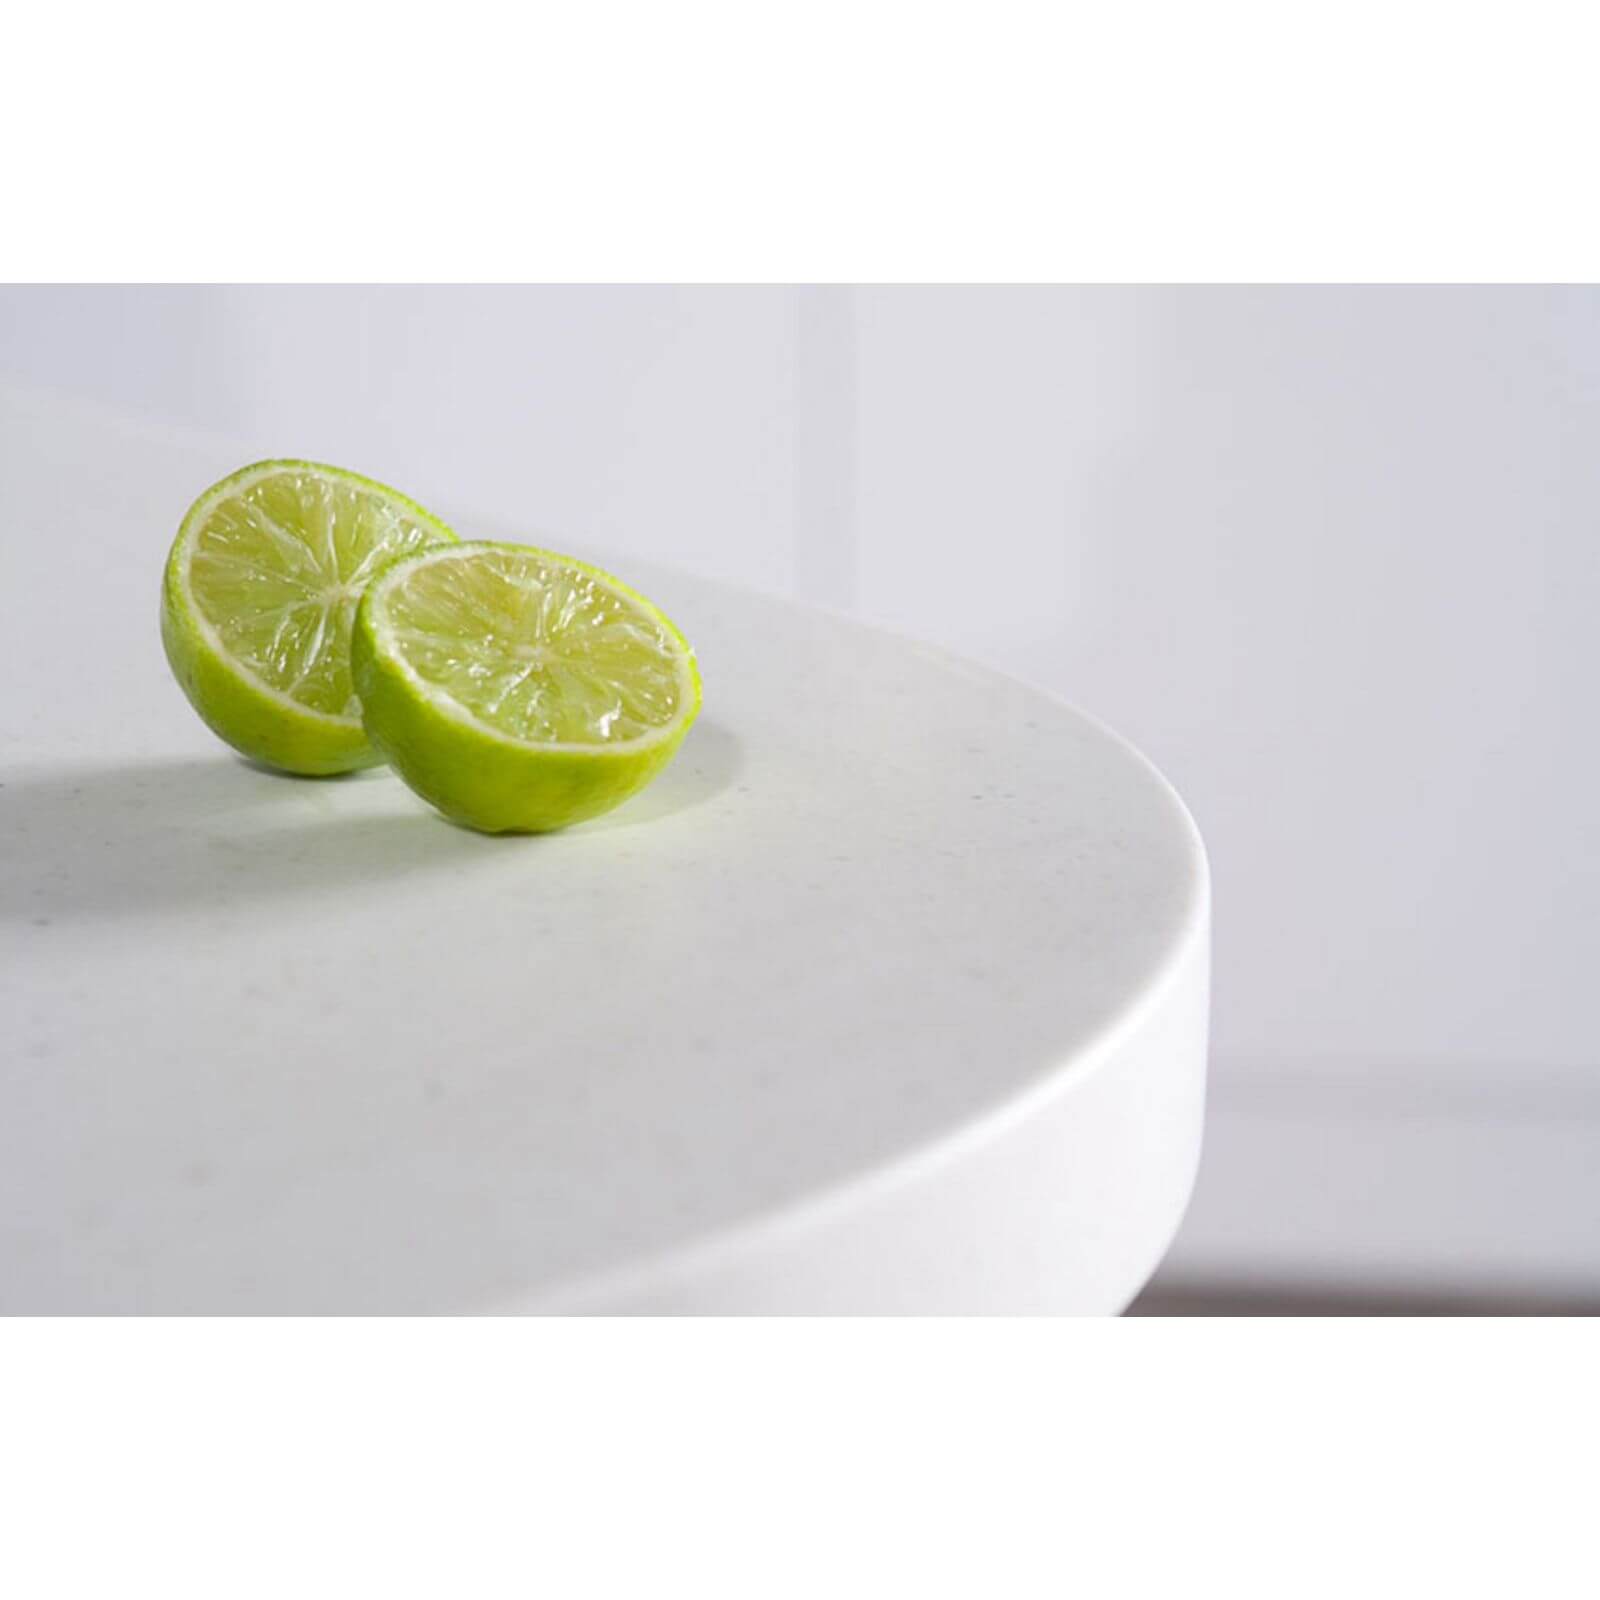 Maia Calcite Kitchen Sink Worktop - Acrylic Super Large Right Hand Bowl - 1800 x 650 x 28mm